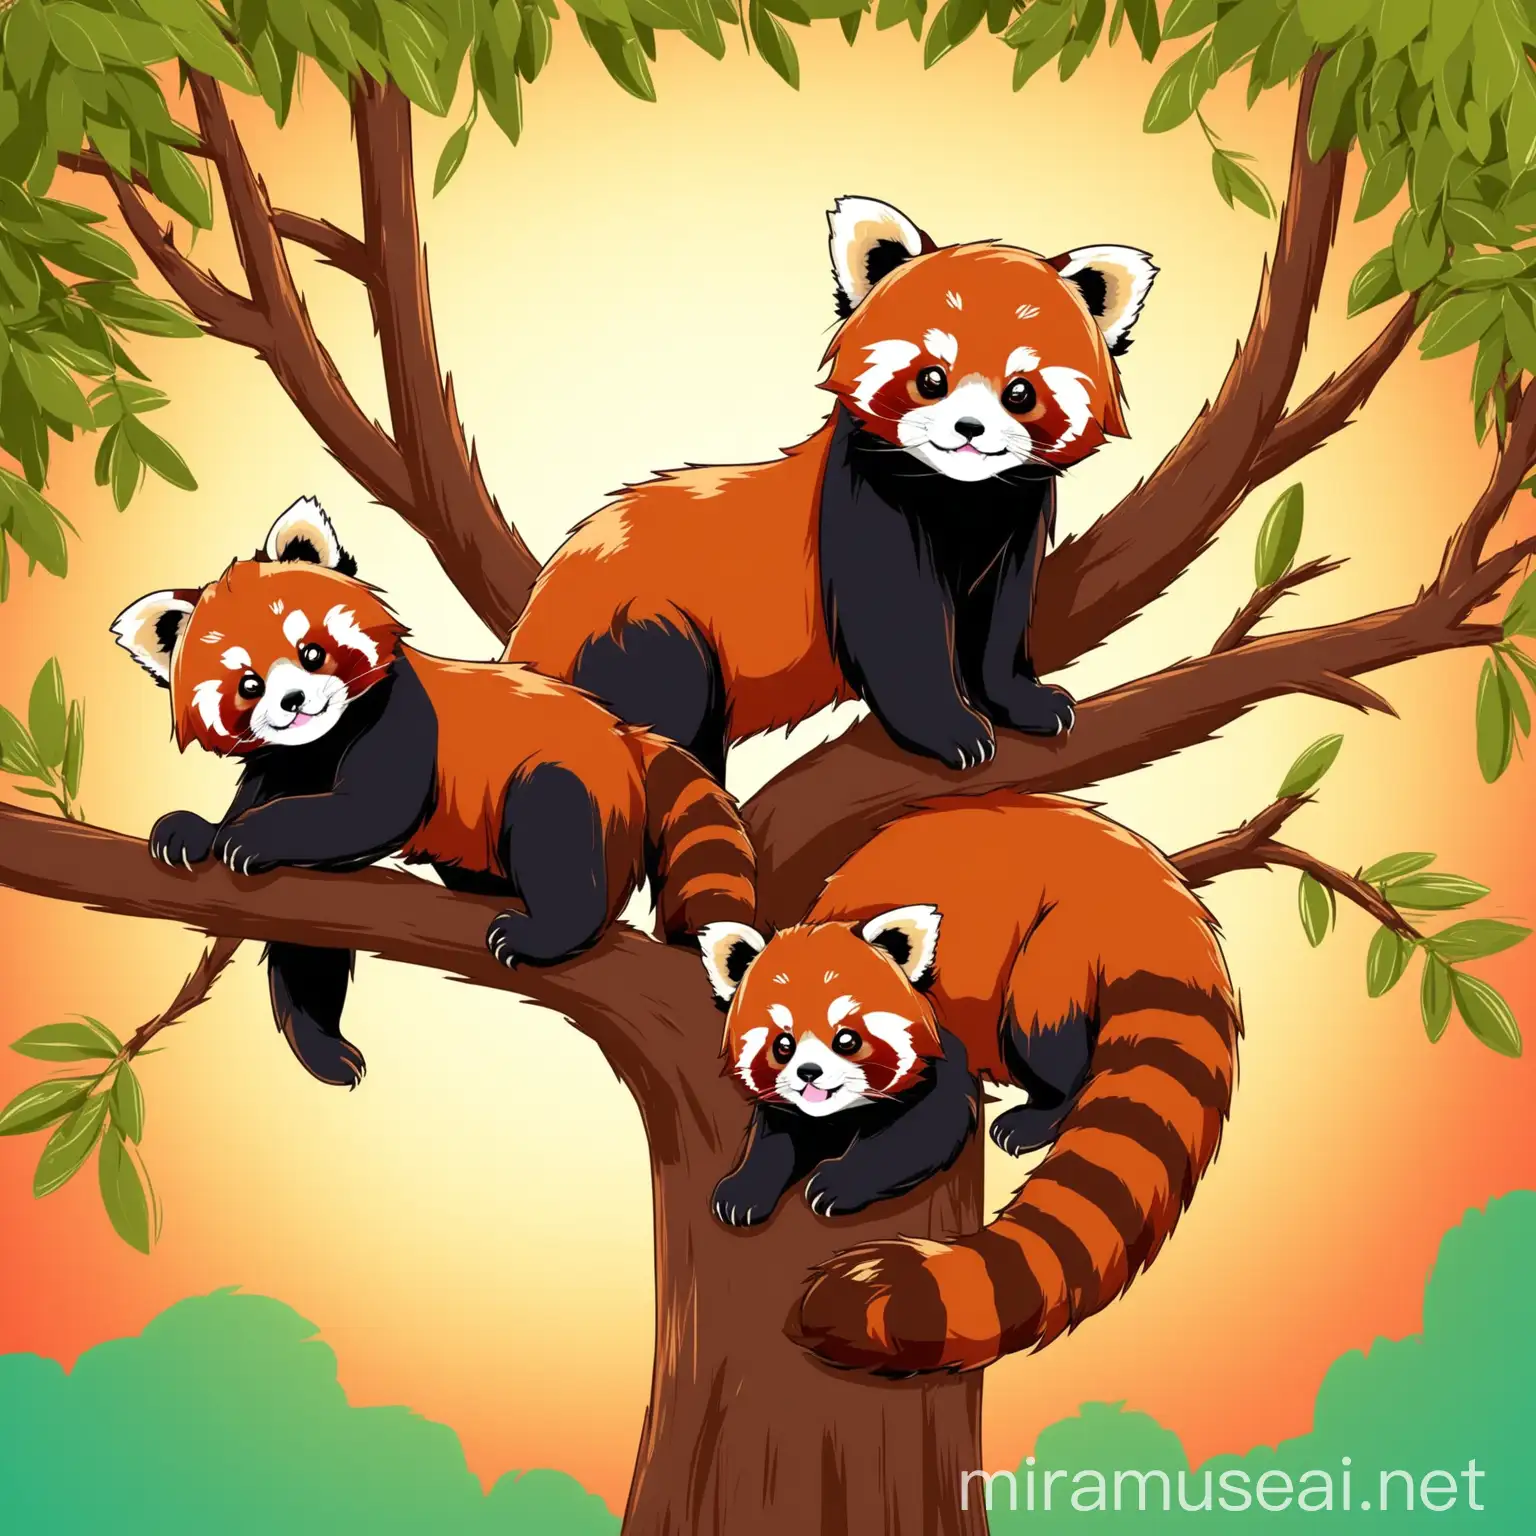 Adorable Red Panda and Cubs Climbing Tree in Vibrant MultiColored Setting